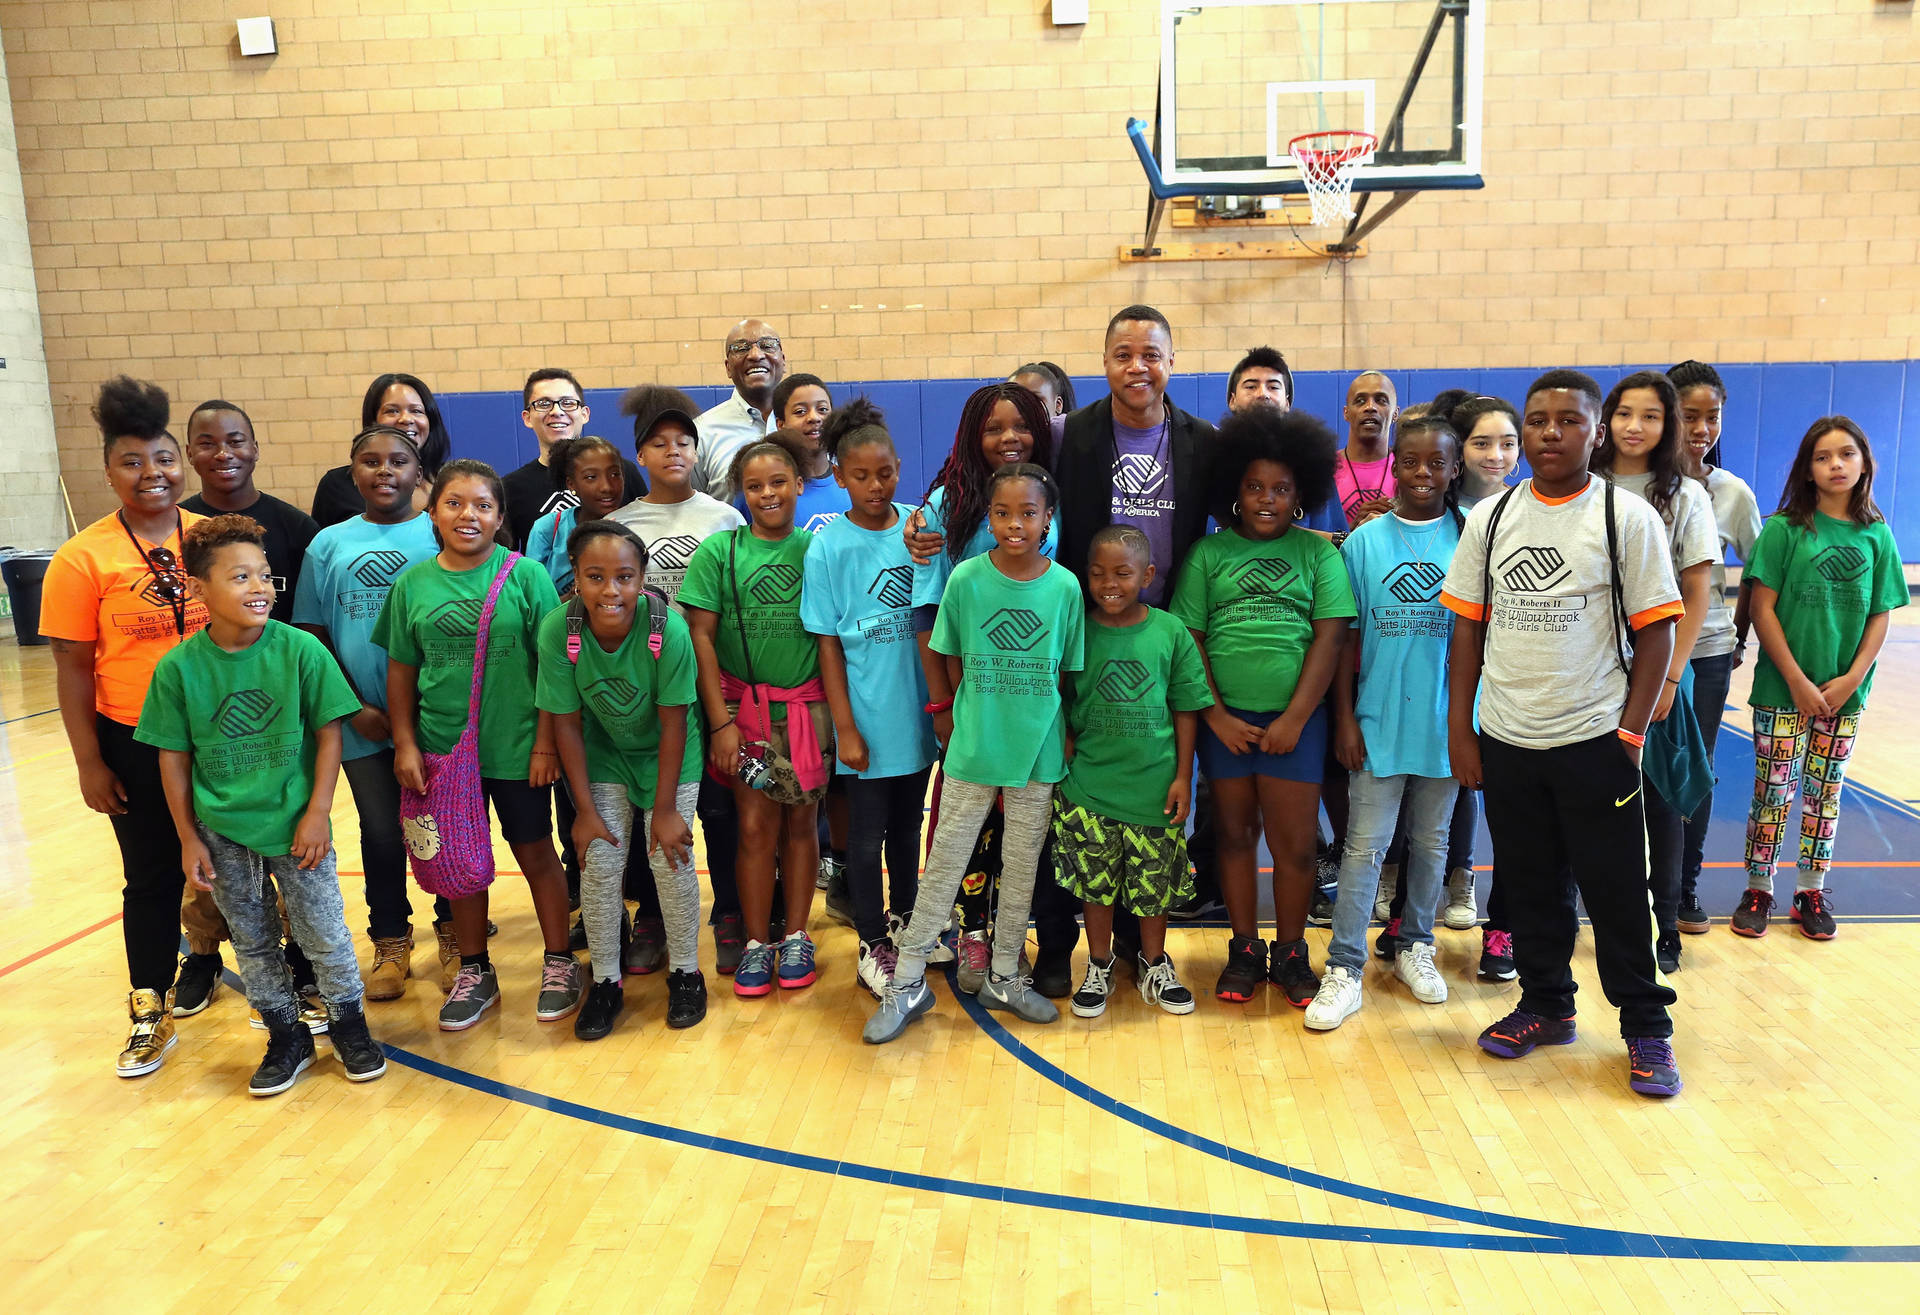 Cuba Gooding Jr. Visits With Youth Wallpaper